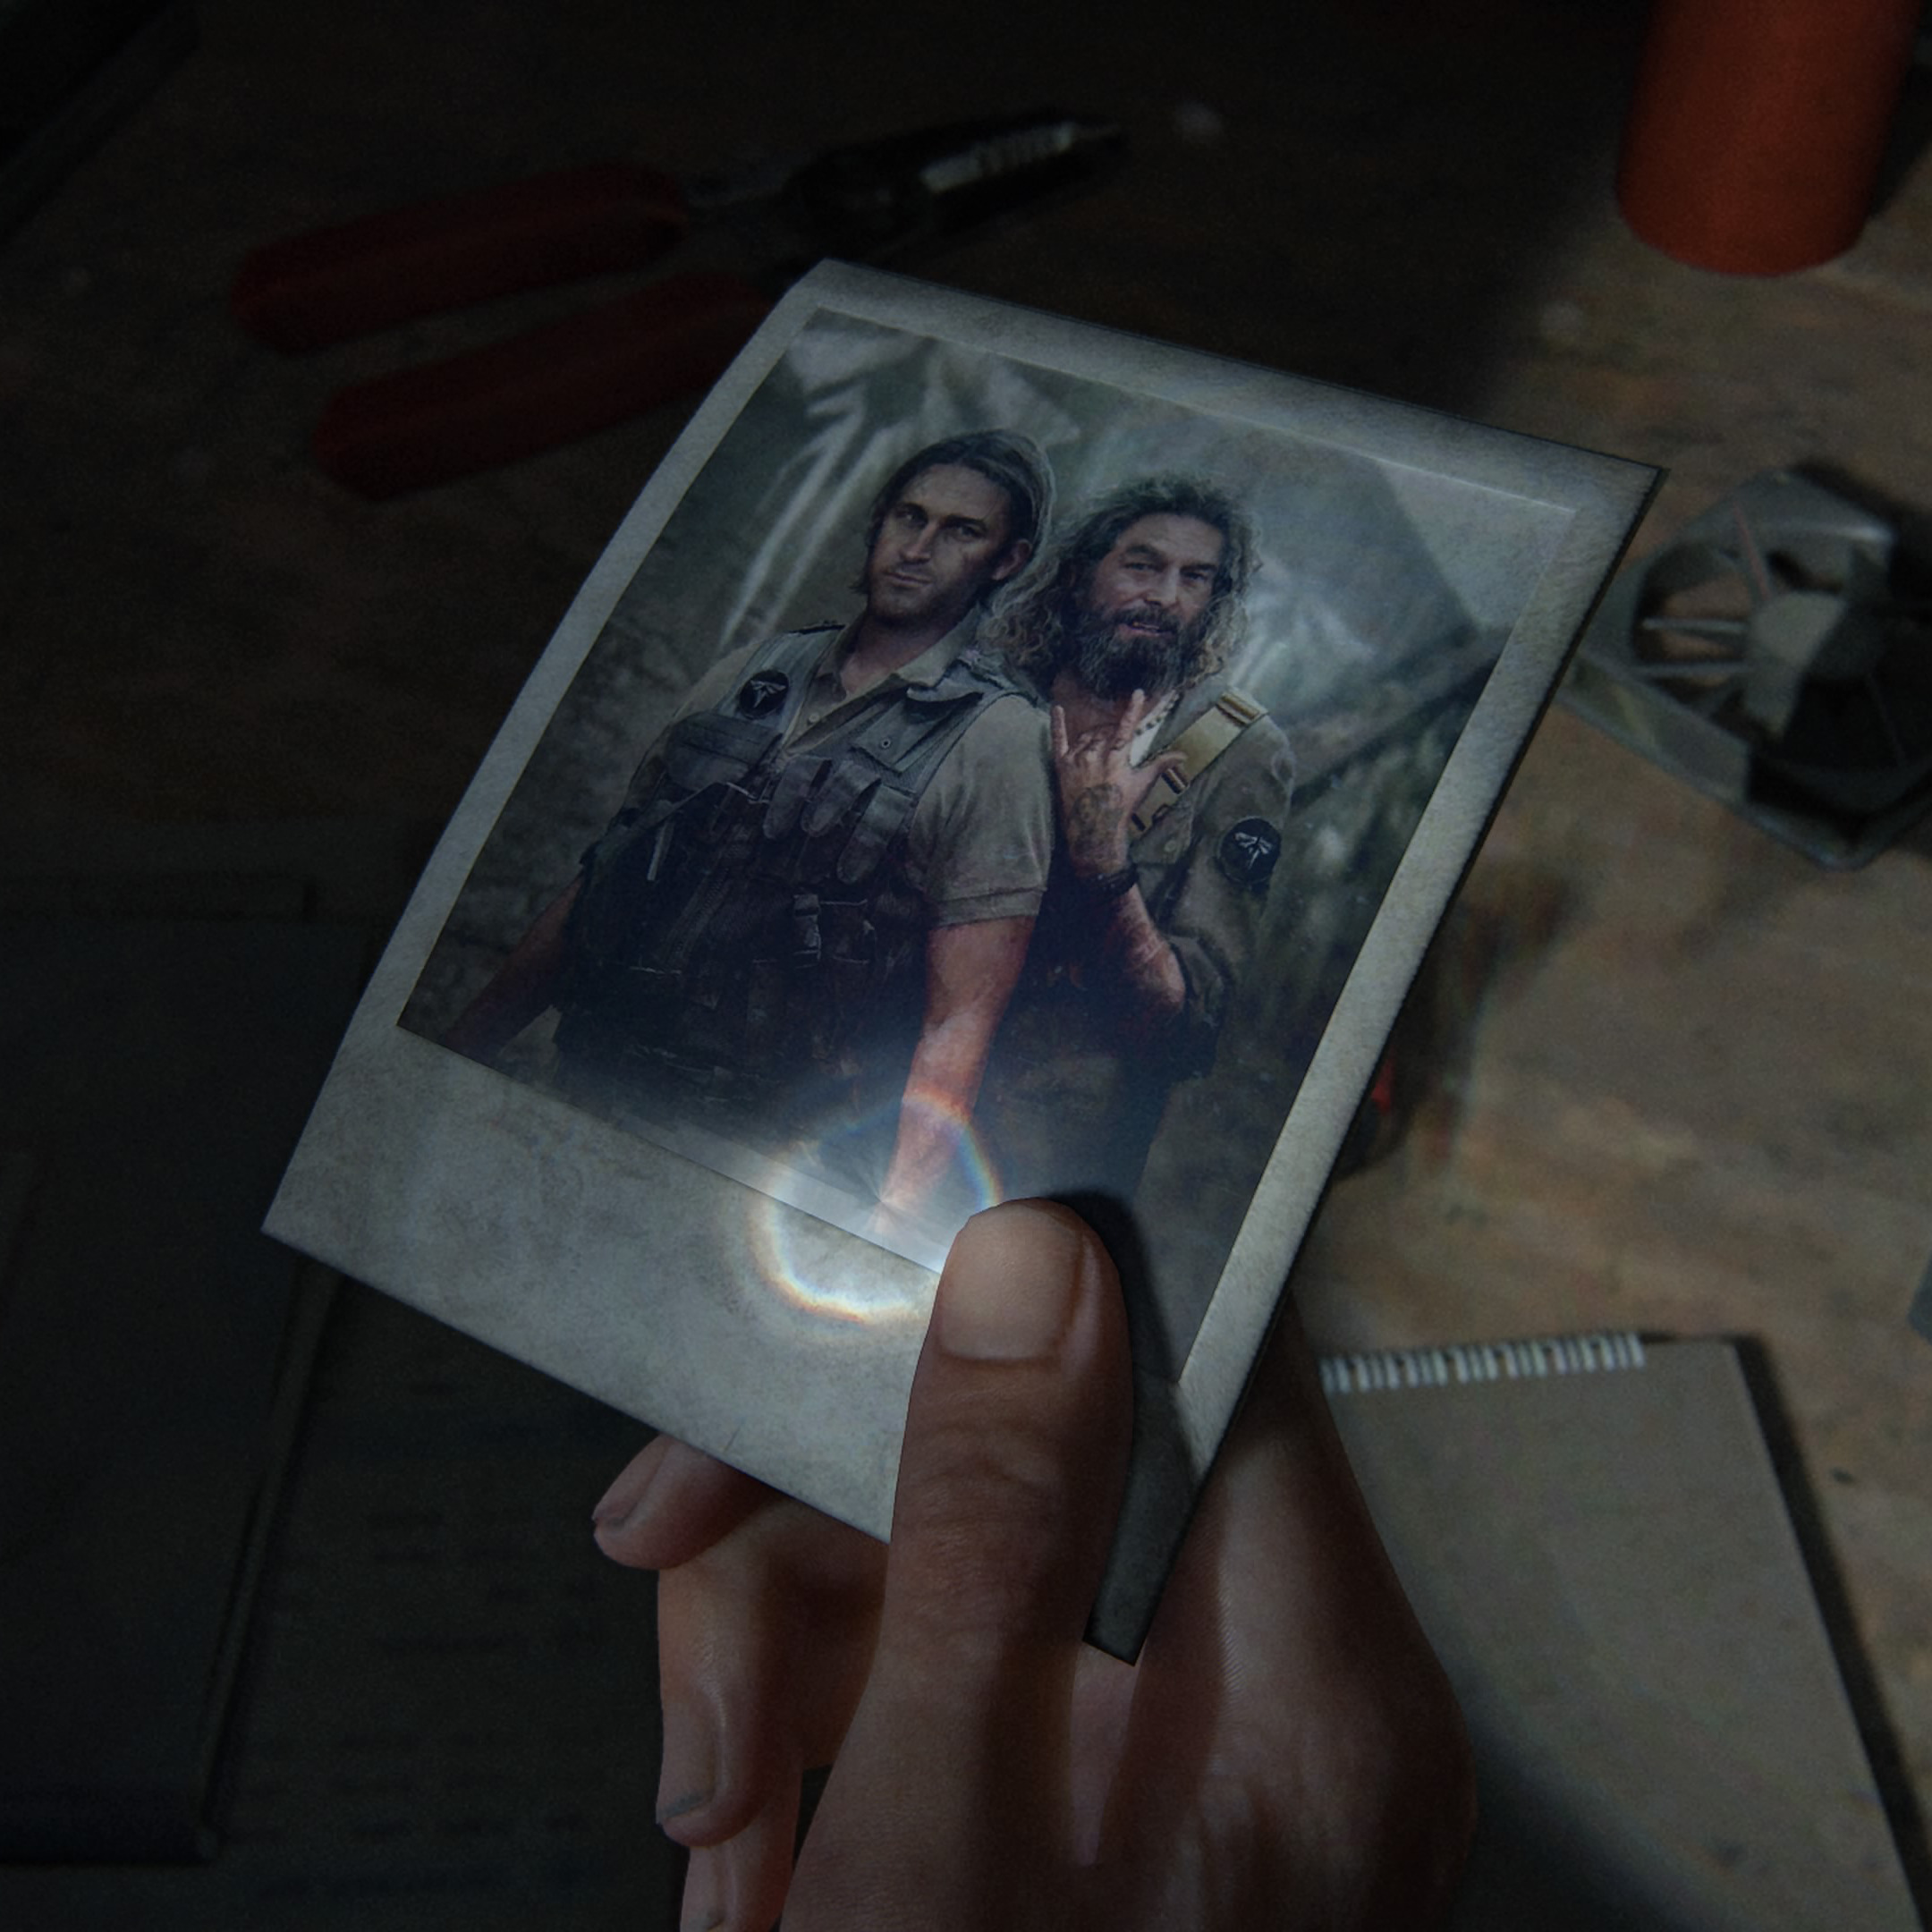 Tommy Wounded Artwork - The Last of Us Part II Art Gallery